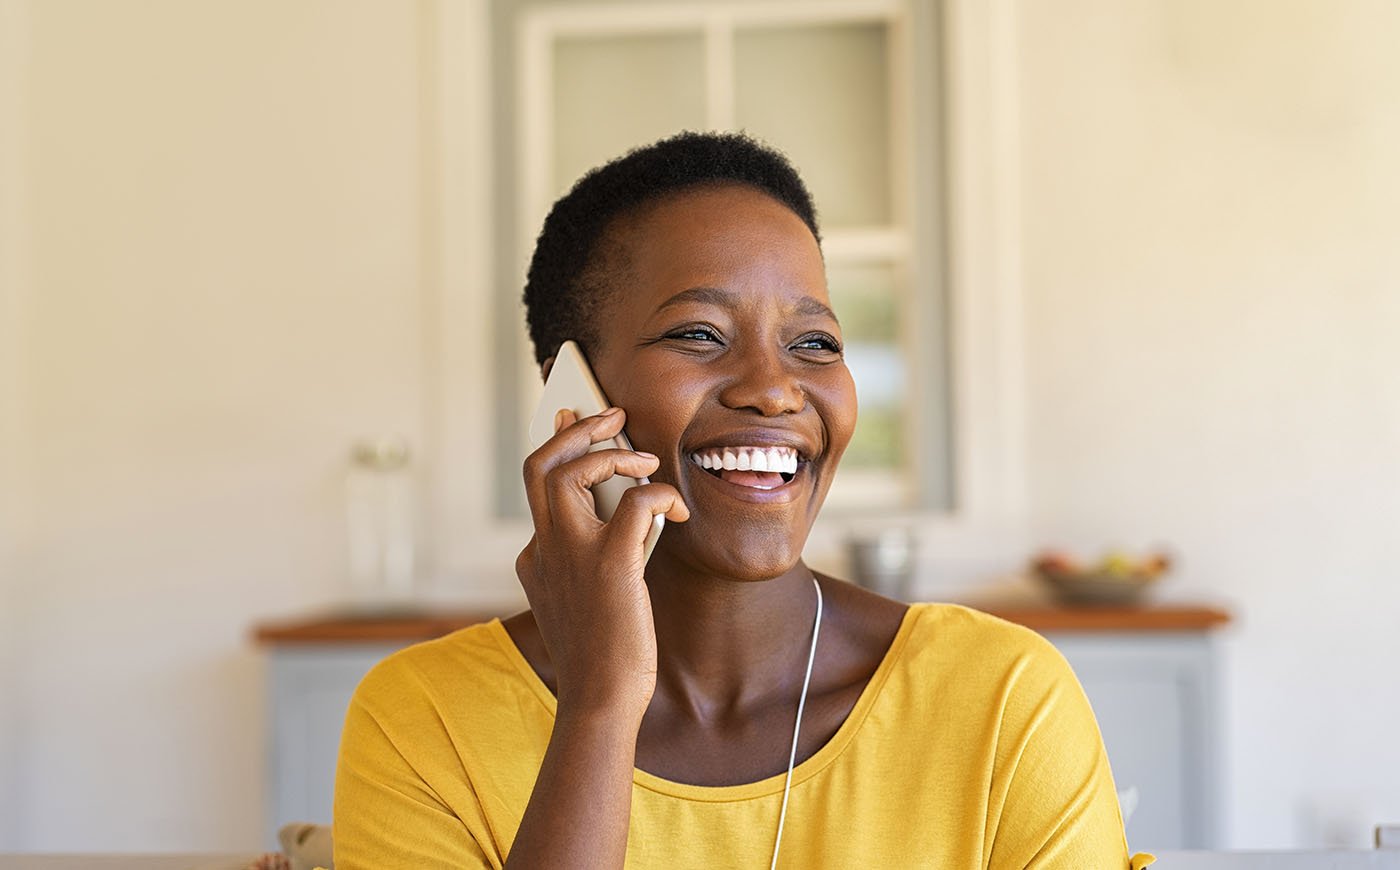 Smiling laughing Black woman talking on the phone in her home